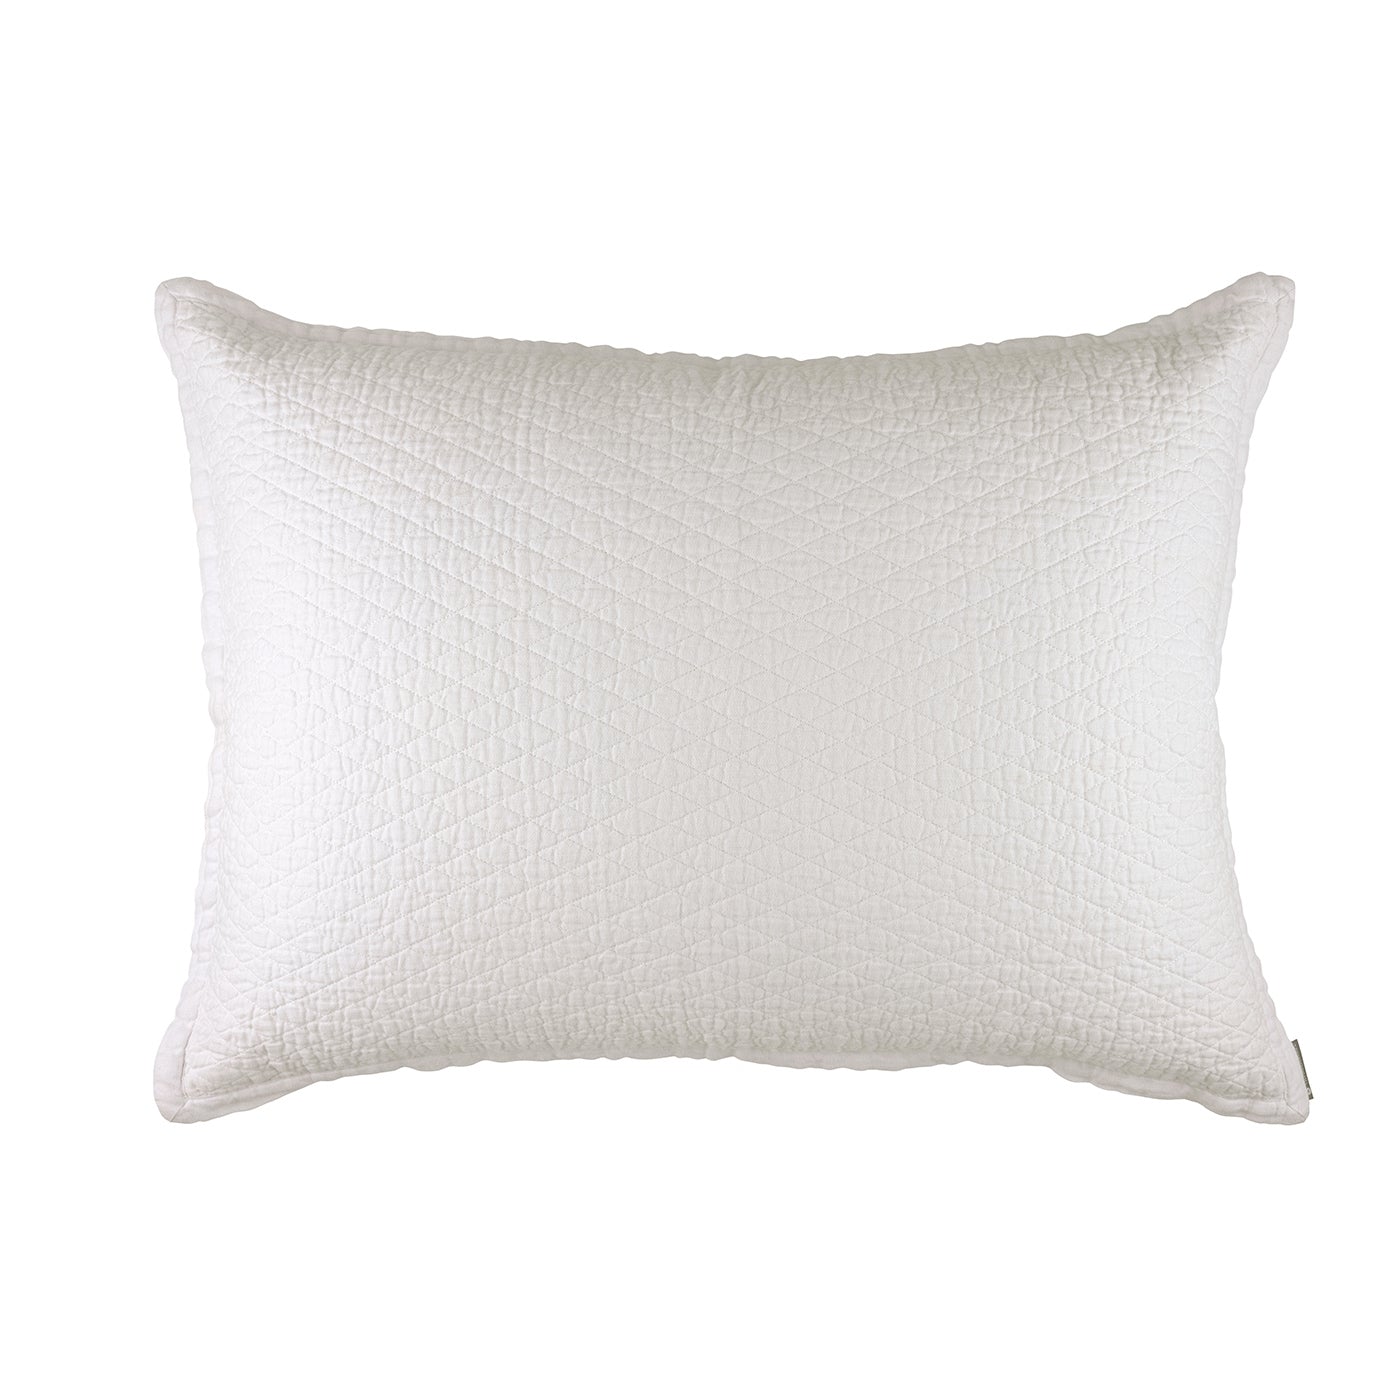 Dawn White Luxe Euro Pillow by Lili Alessandra | Fig Linens and Home